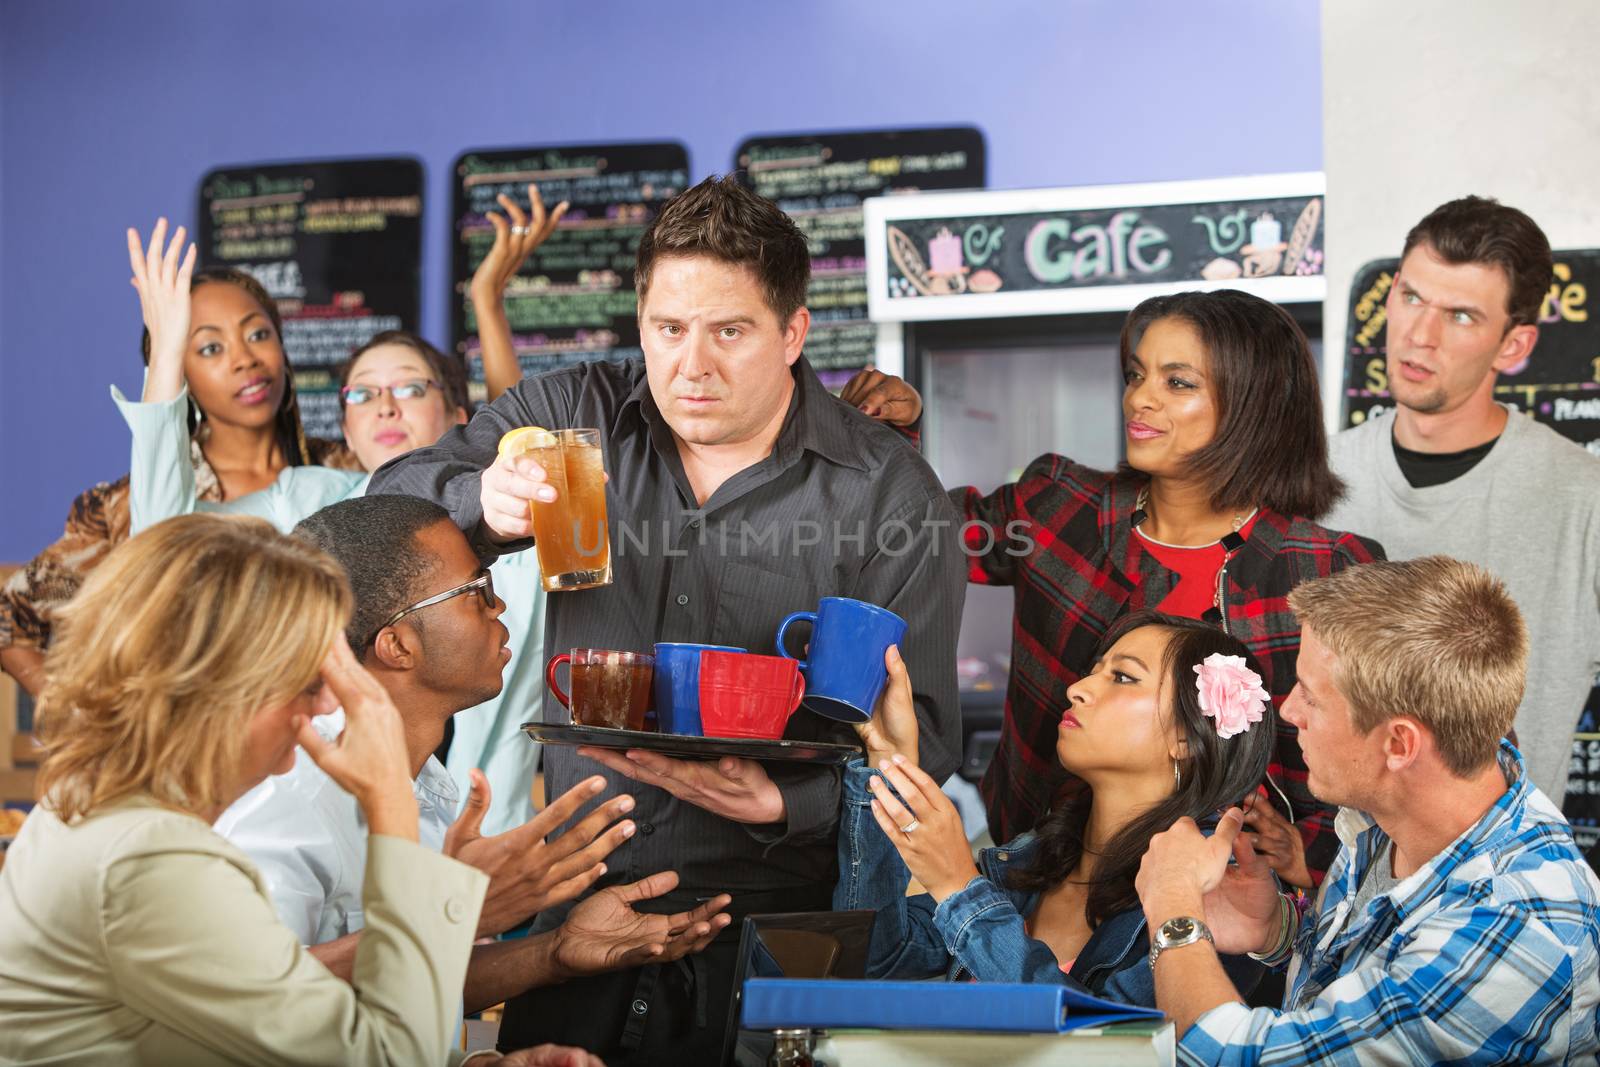 Stressed out restaurant waiter with group of angry customers